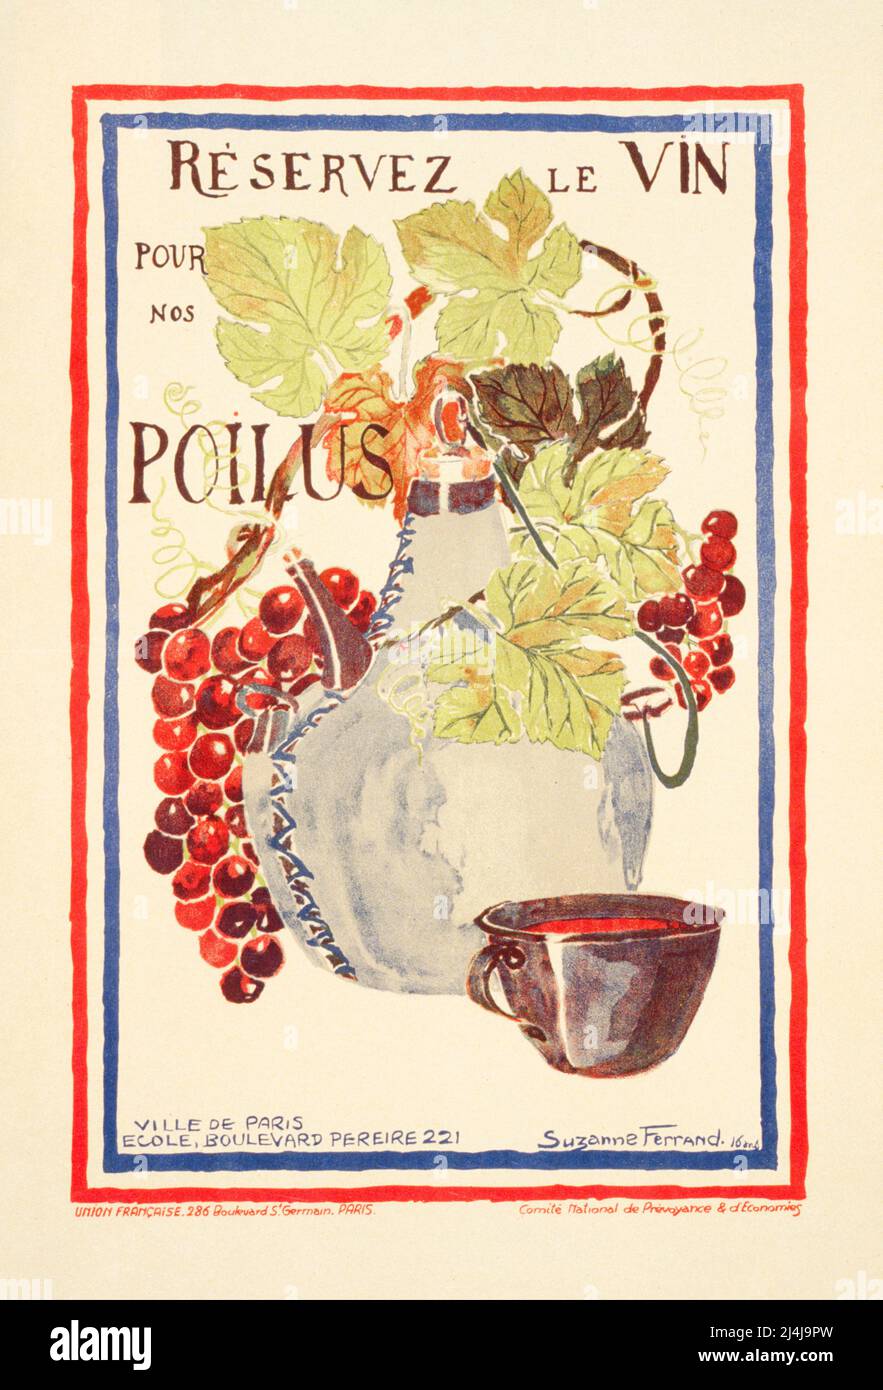 A French advertising poster from 1916 showing a jug of wine surrounded by bunches of grapes and a cup filled with wine next to it. The artist is Suzanne Ferrand Stock Photo